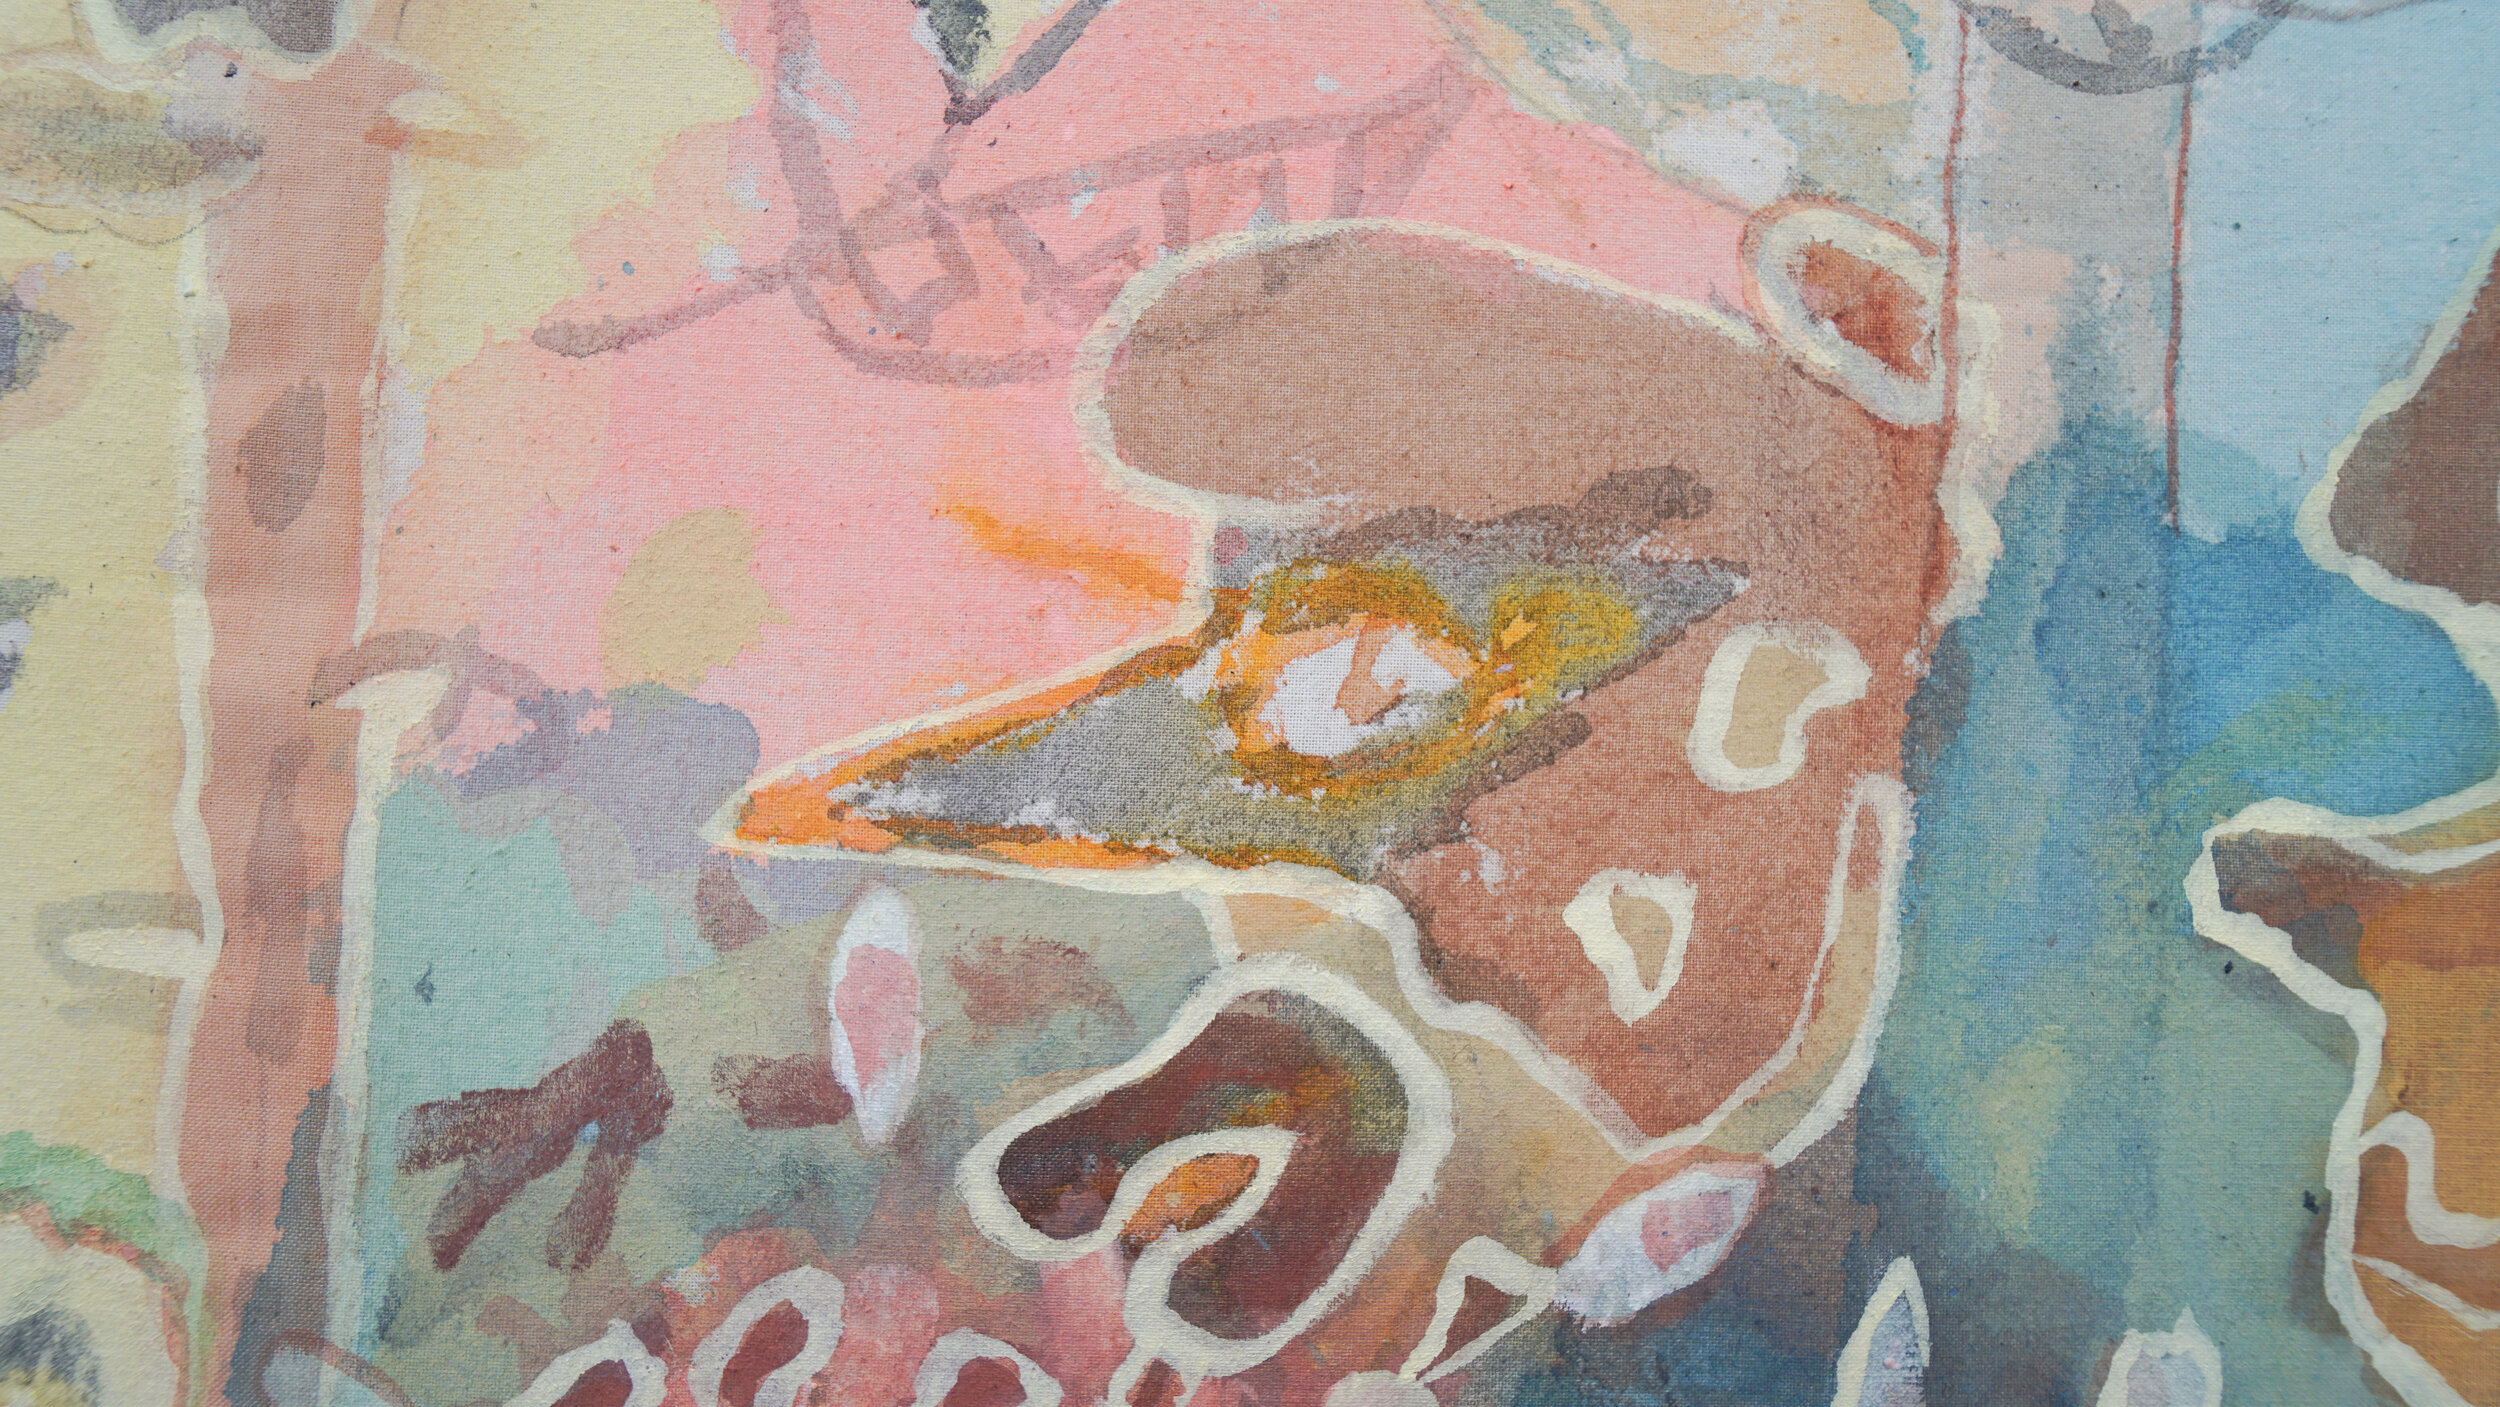  Ross Simonini   The Sunders , 2020 (detail) Watercolor, tempera, wax crayon, and graphite on muslin  35 x 35 inches 